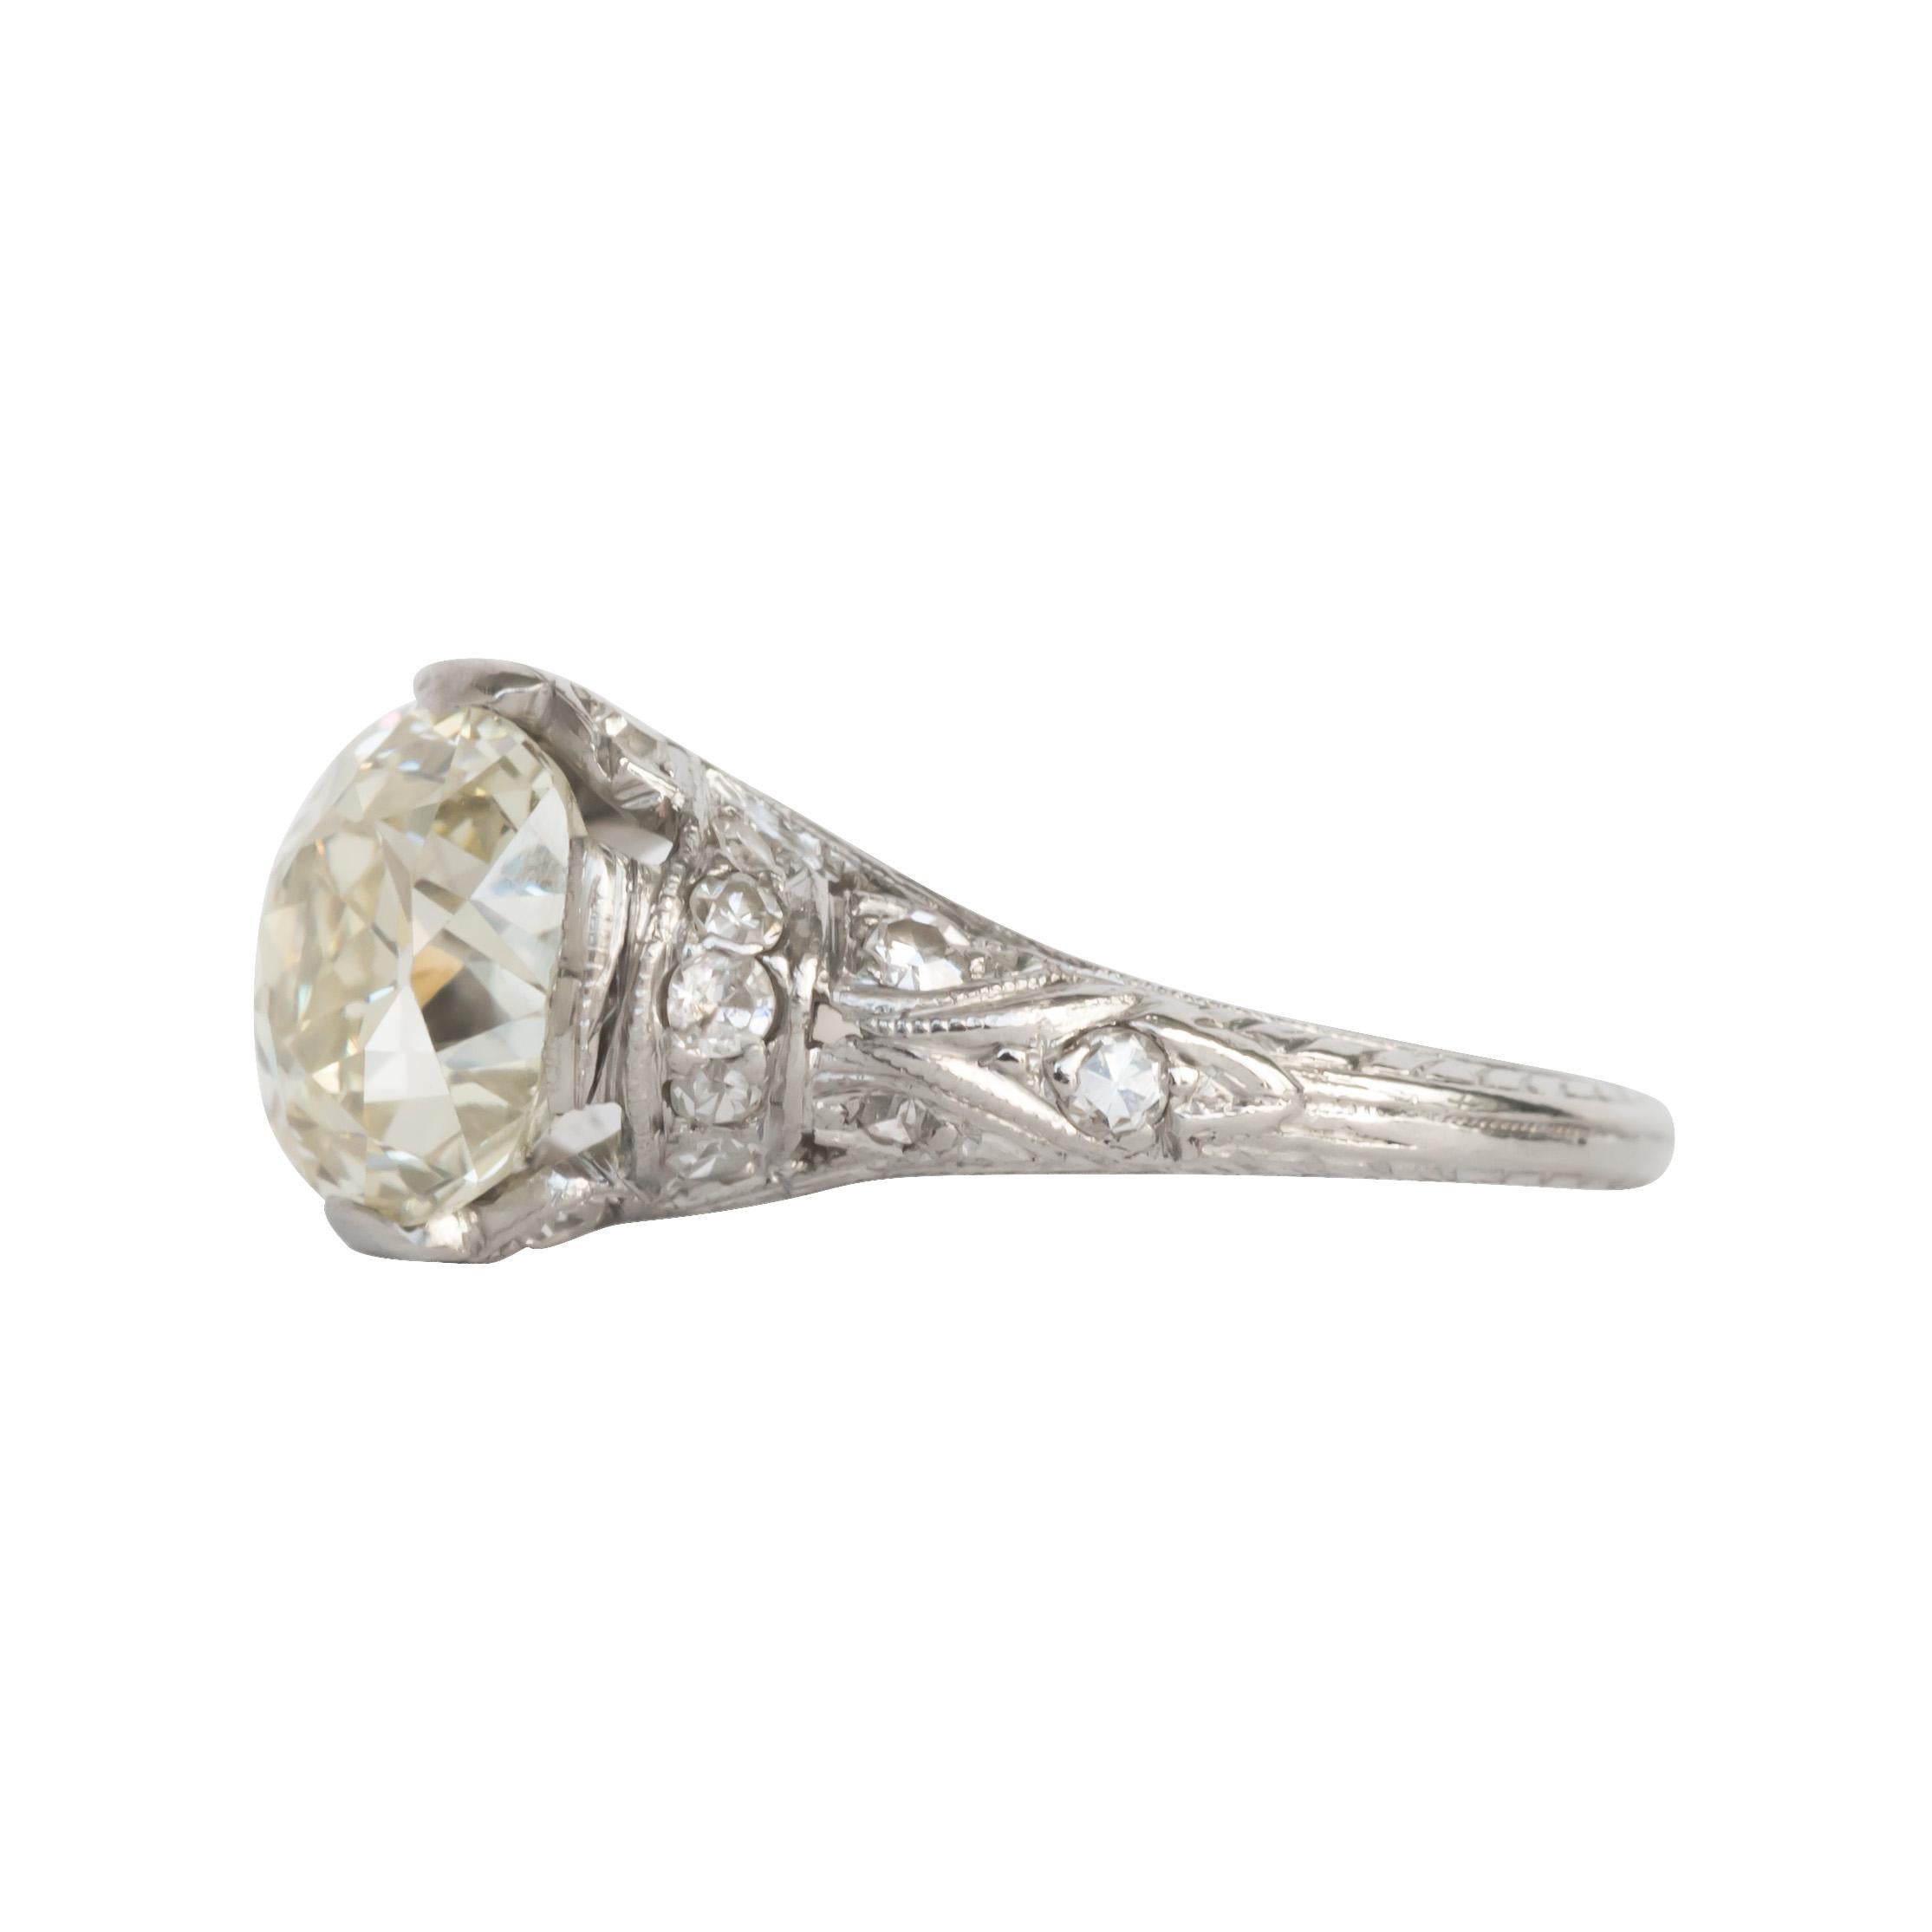 Item Details: 
Ring Size: 5
Metal Type: Platinum [Hallmarked, and Tested]
Weight: 4.2 grams

Center Diamond Details:
Weight: 2.20 carat
Cut: Antique Cushion
Color: N
Clarity: VS2

Side Diamond Details:
Weight: .20 carat total weight
Cut: Antique